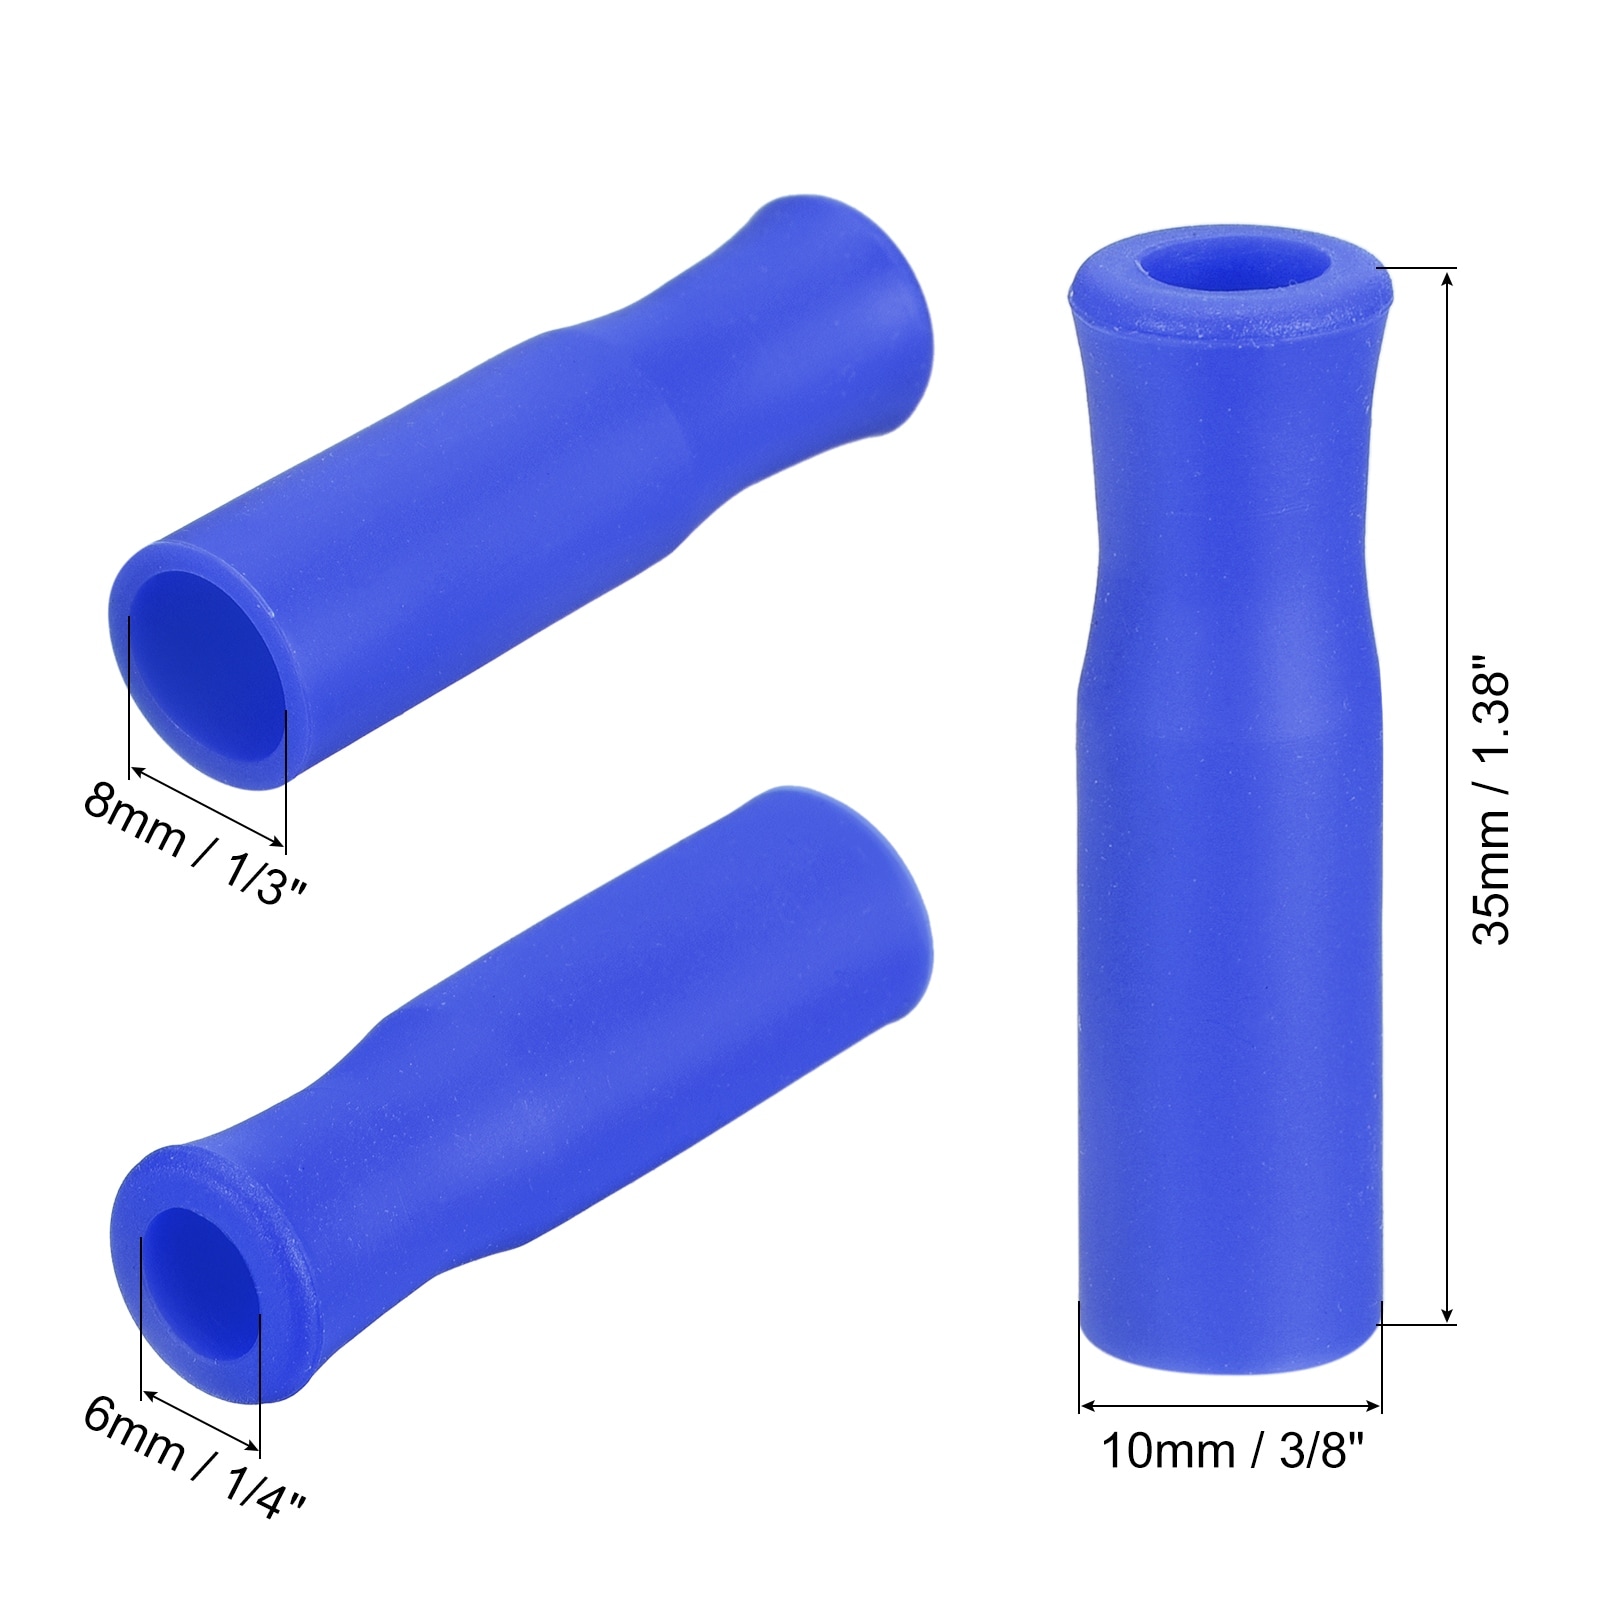 https://ak1.ostkcdn.com/images/products/is/images/direct/3f2245f29e4a44e2d6a4ac7491be1e9486b3ca82/12pcs-Silicone-Straw-Tips-for-Stainless-Steel-Straws.jpg